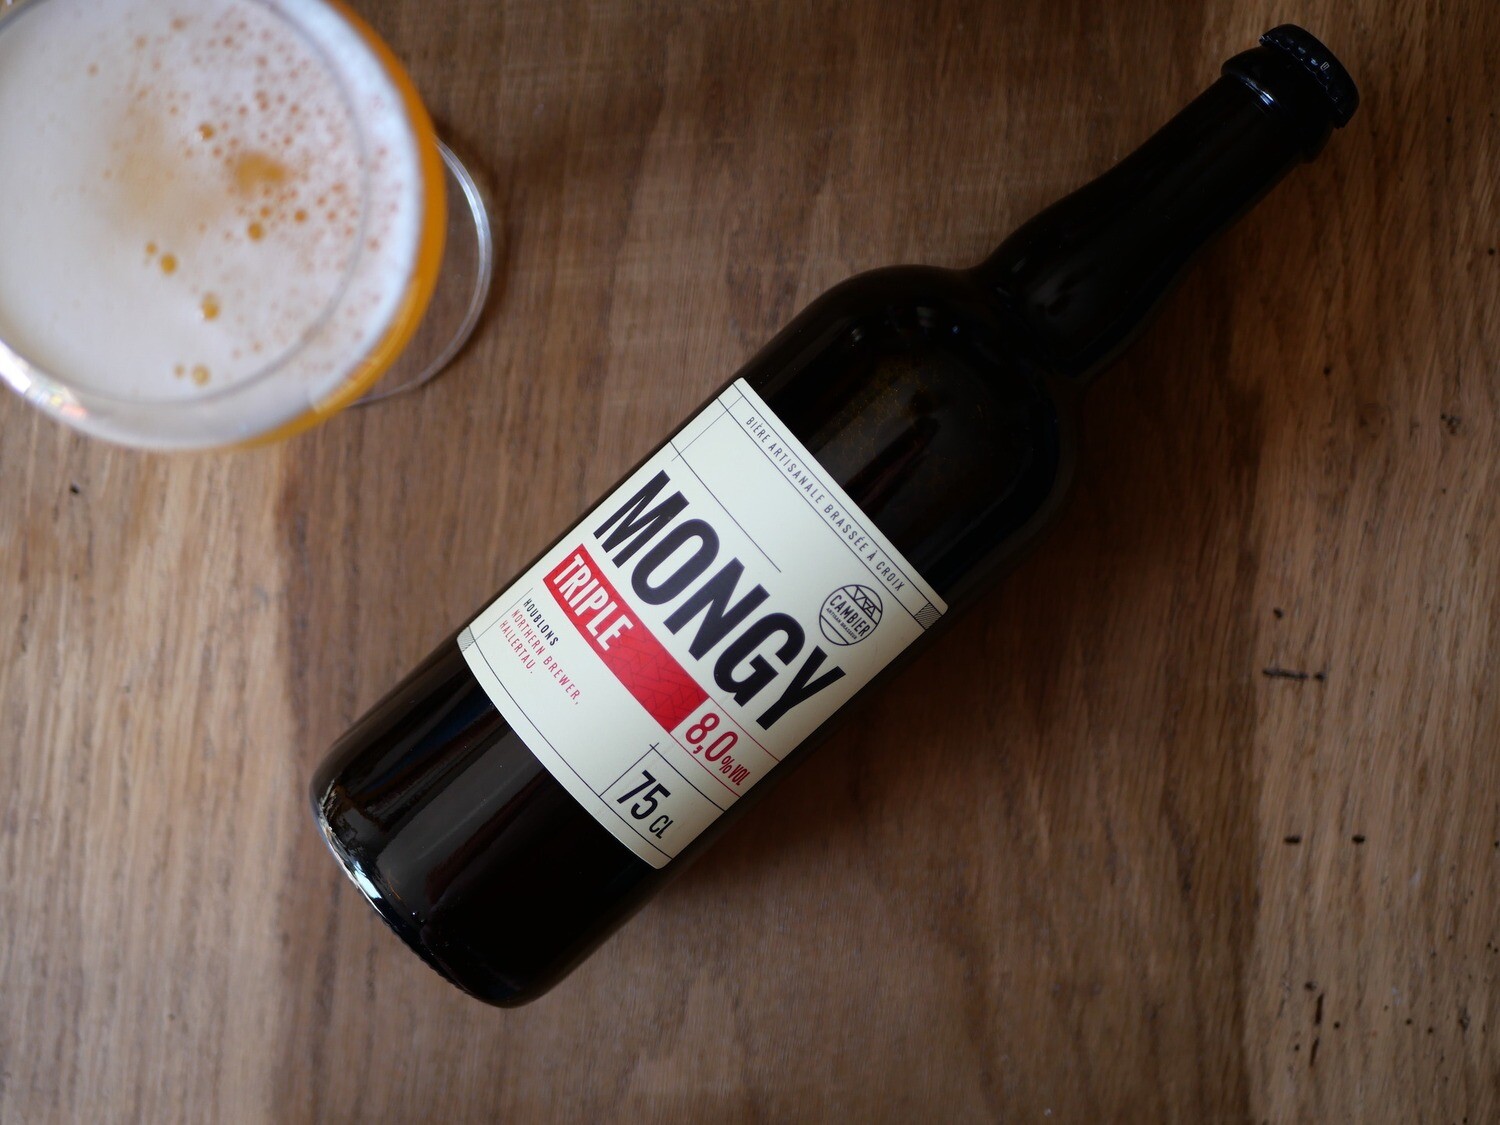 Mongy Triple - Brasserie Cambier (75 cl)